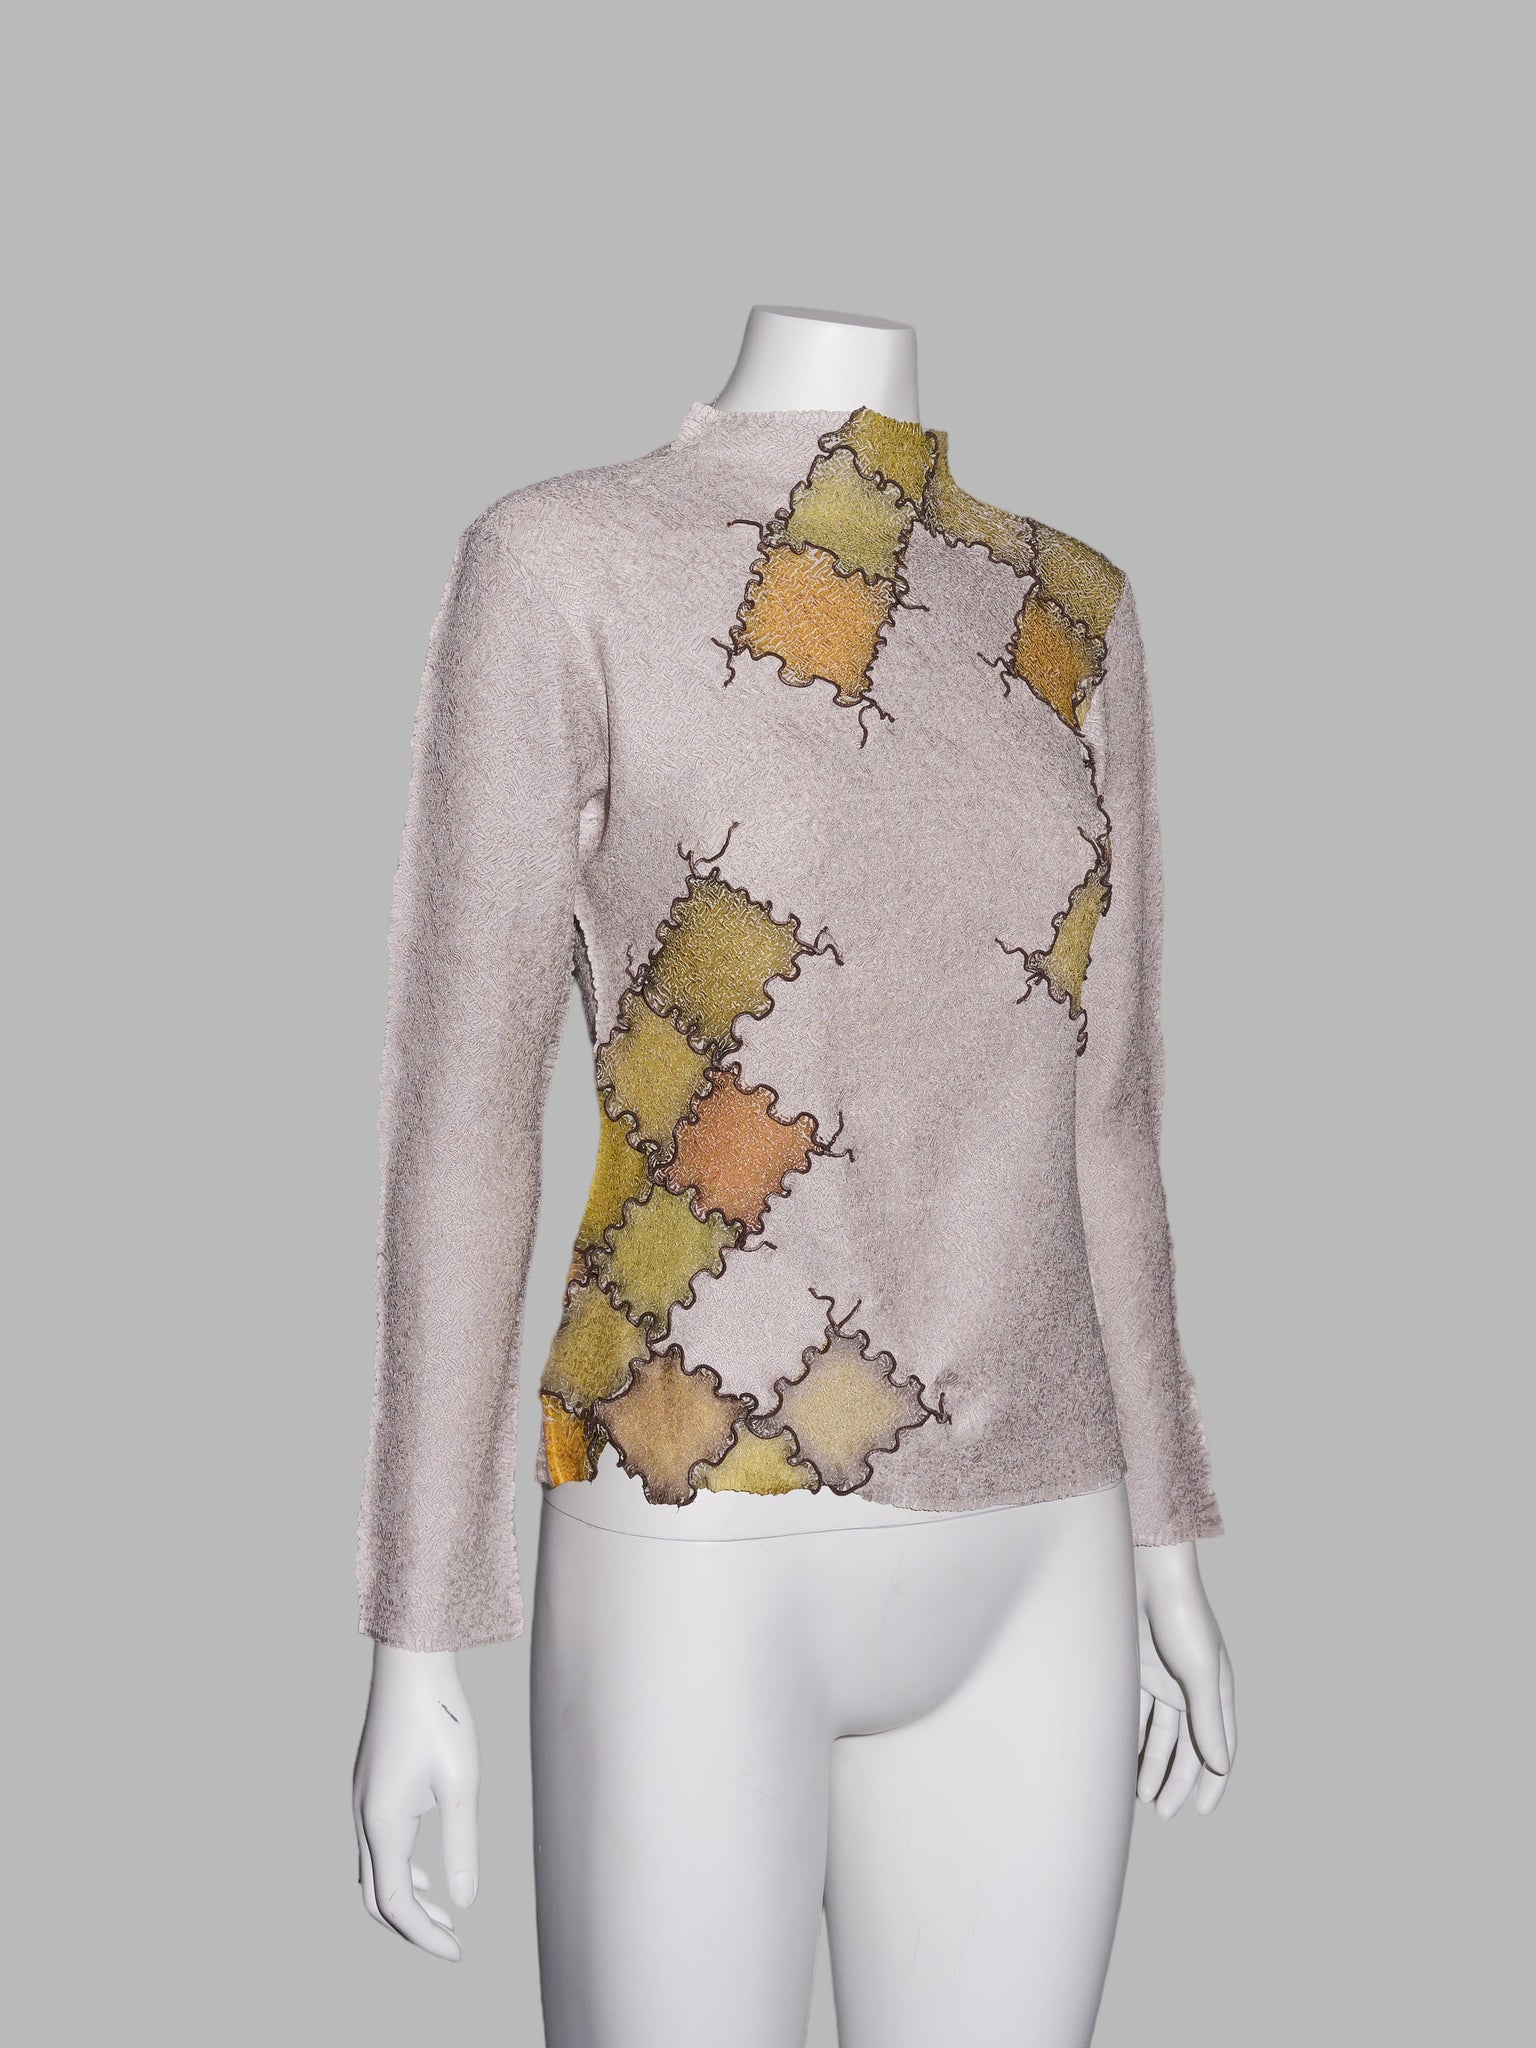 Wrinqle Inoue Pleats greige wrinkled poly top with multicolour squiggly diamonds